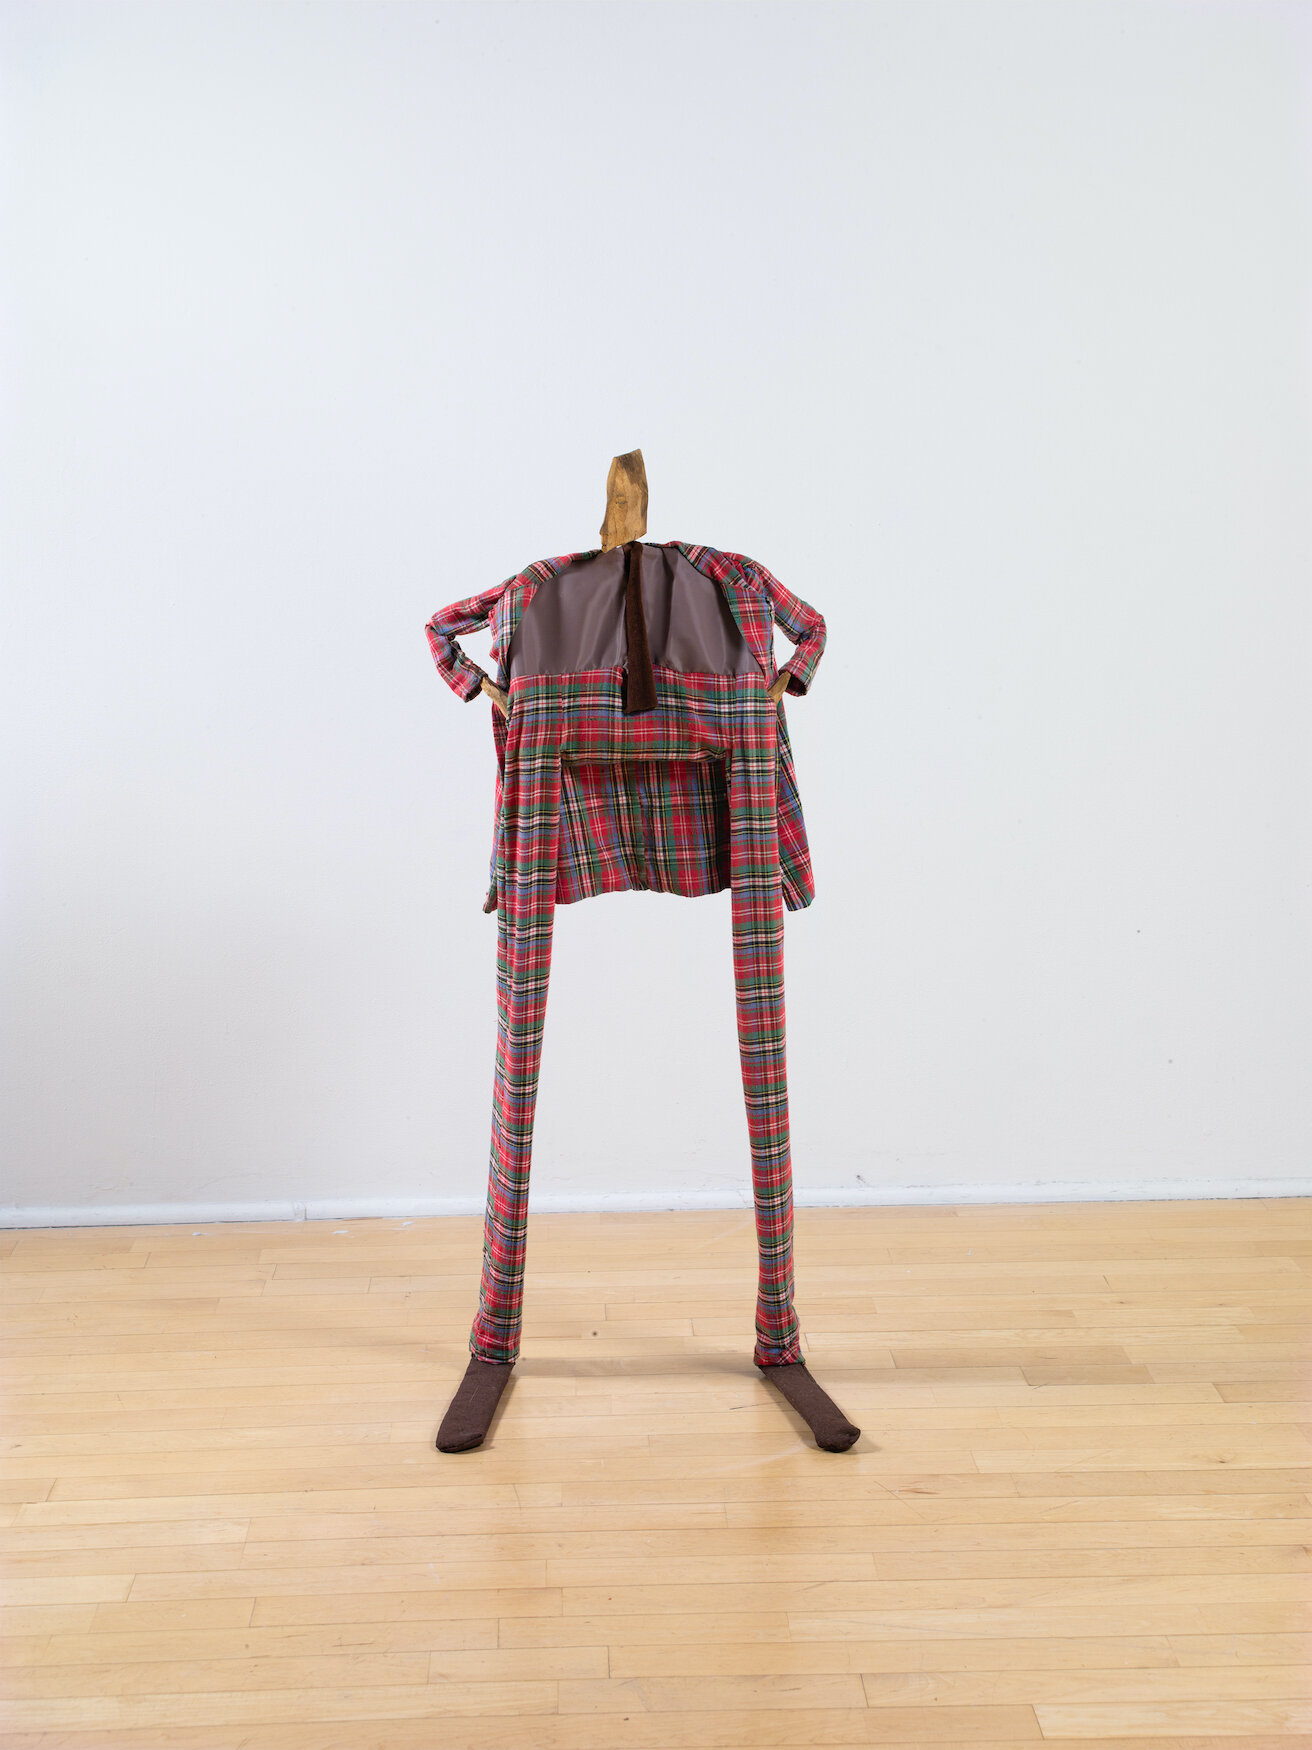  William King,  Early Settler,  2010, Cotton, wood, aluminum armature, 49.5 x 16 x 19 inches 